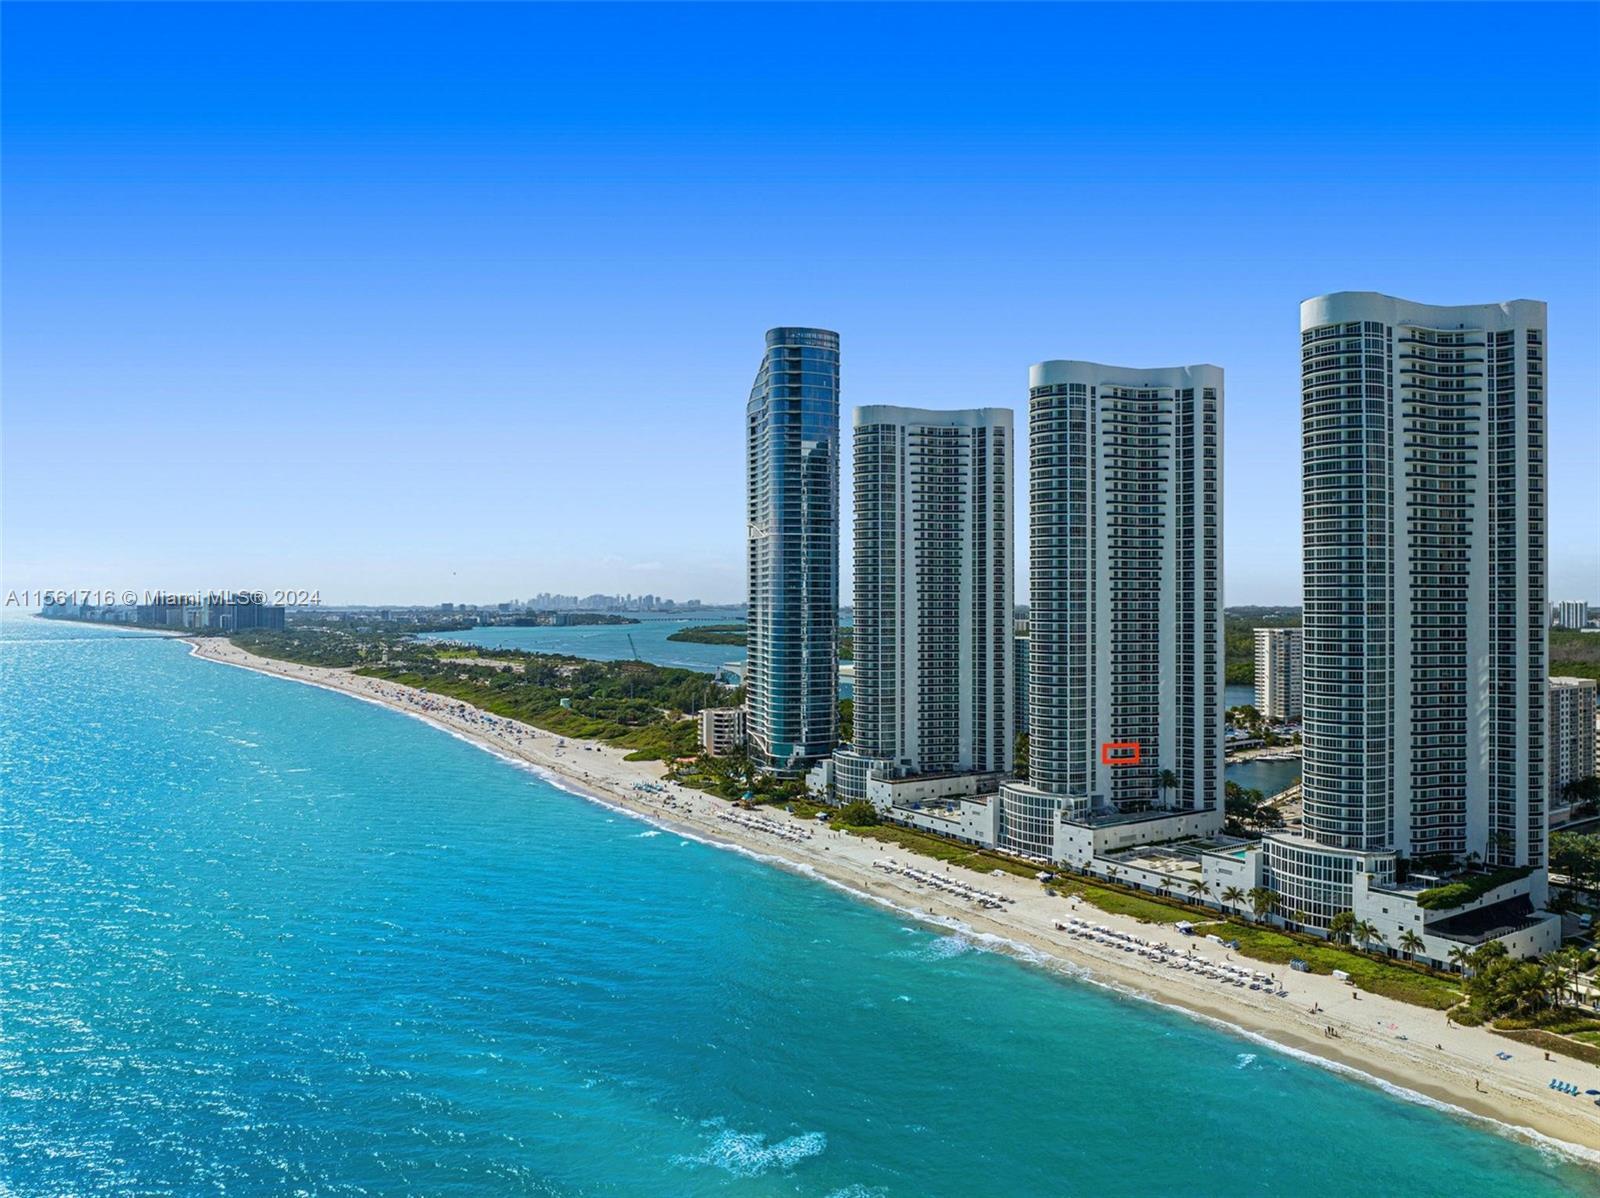 Photo of 15901 Collins Ave #902 in Sunny Isles Beach, FL